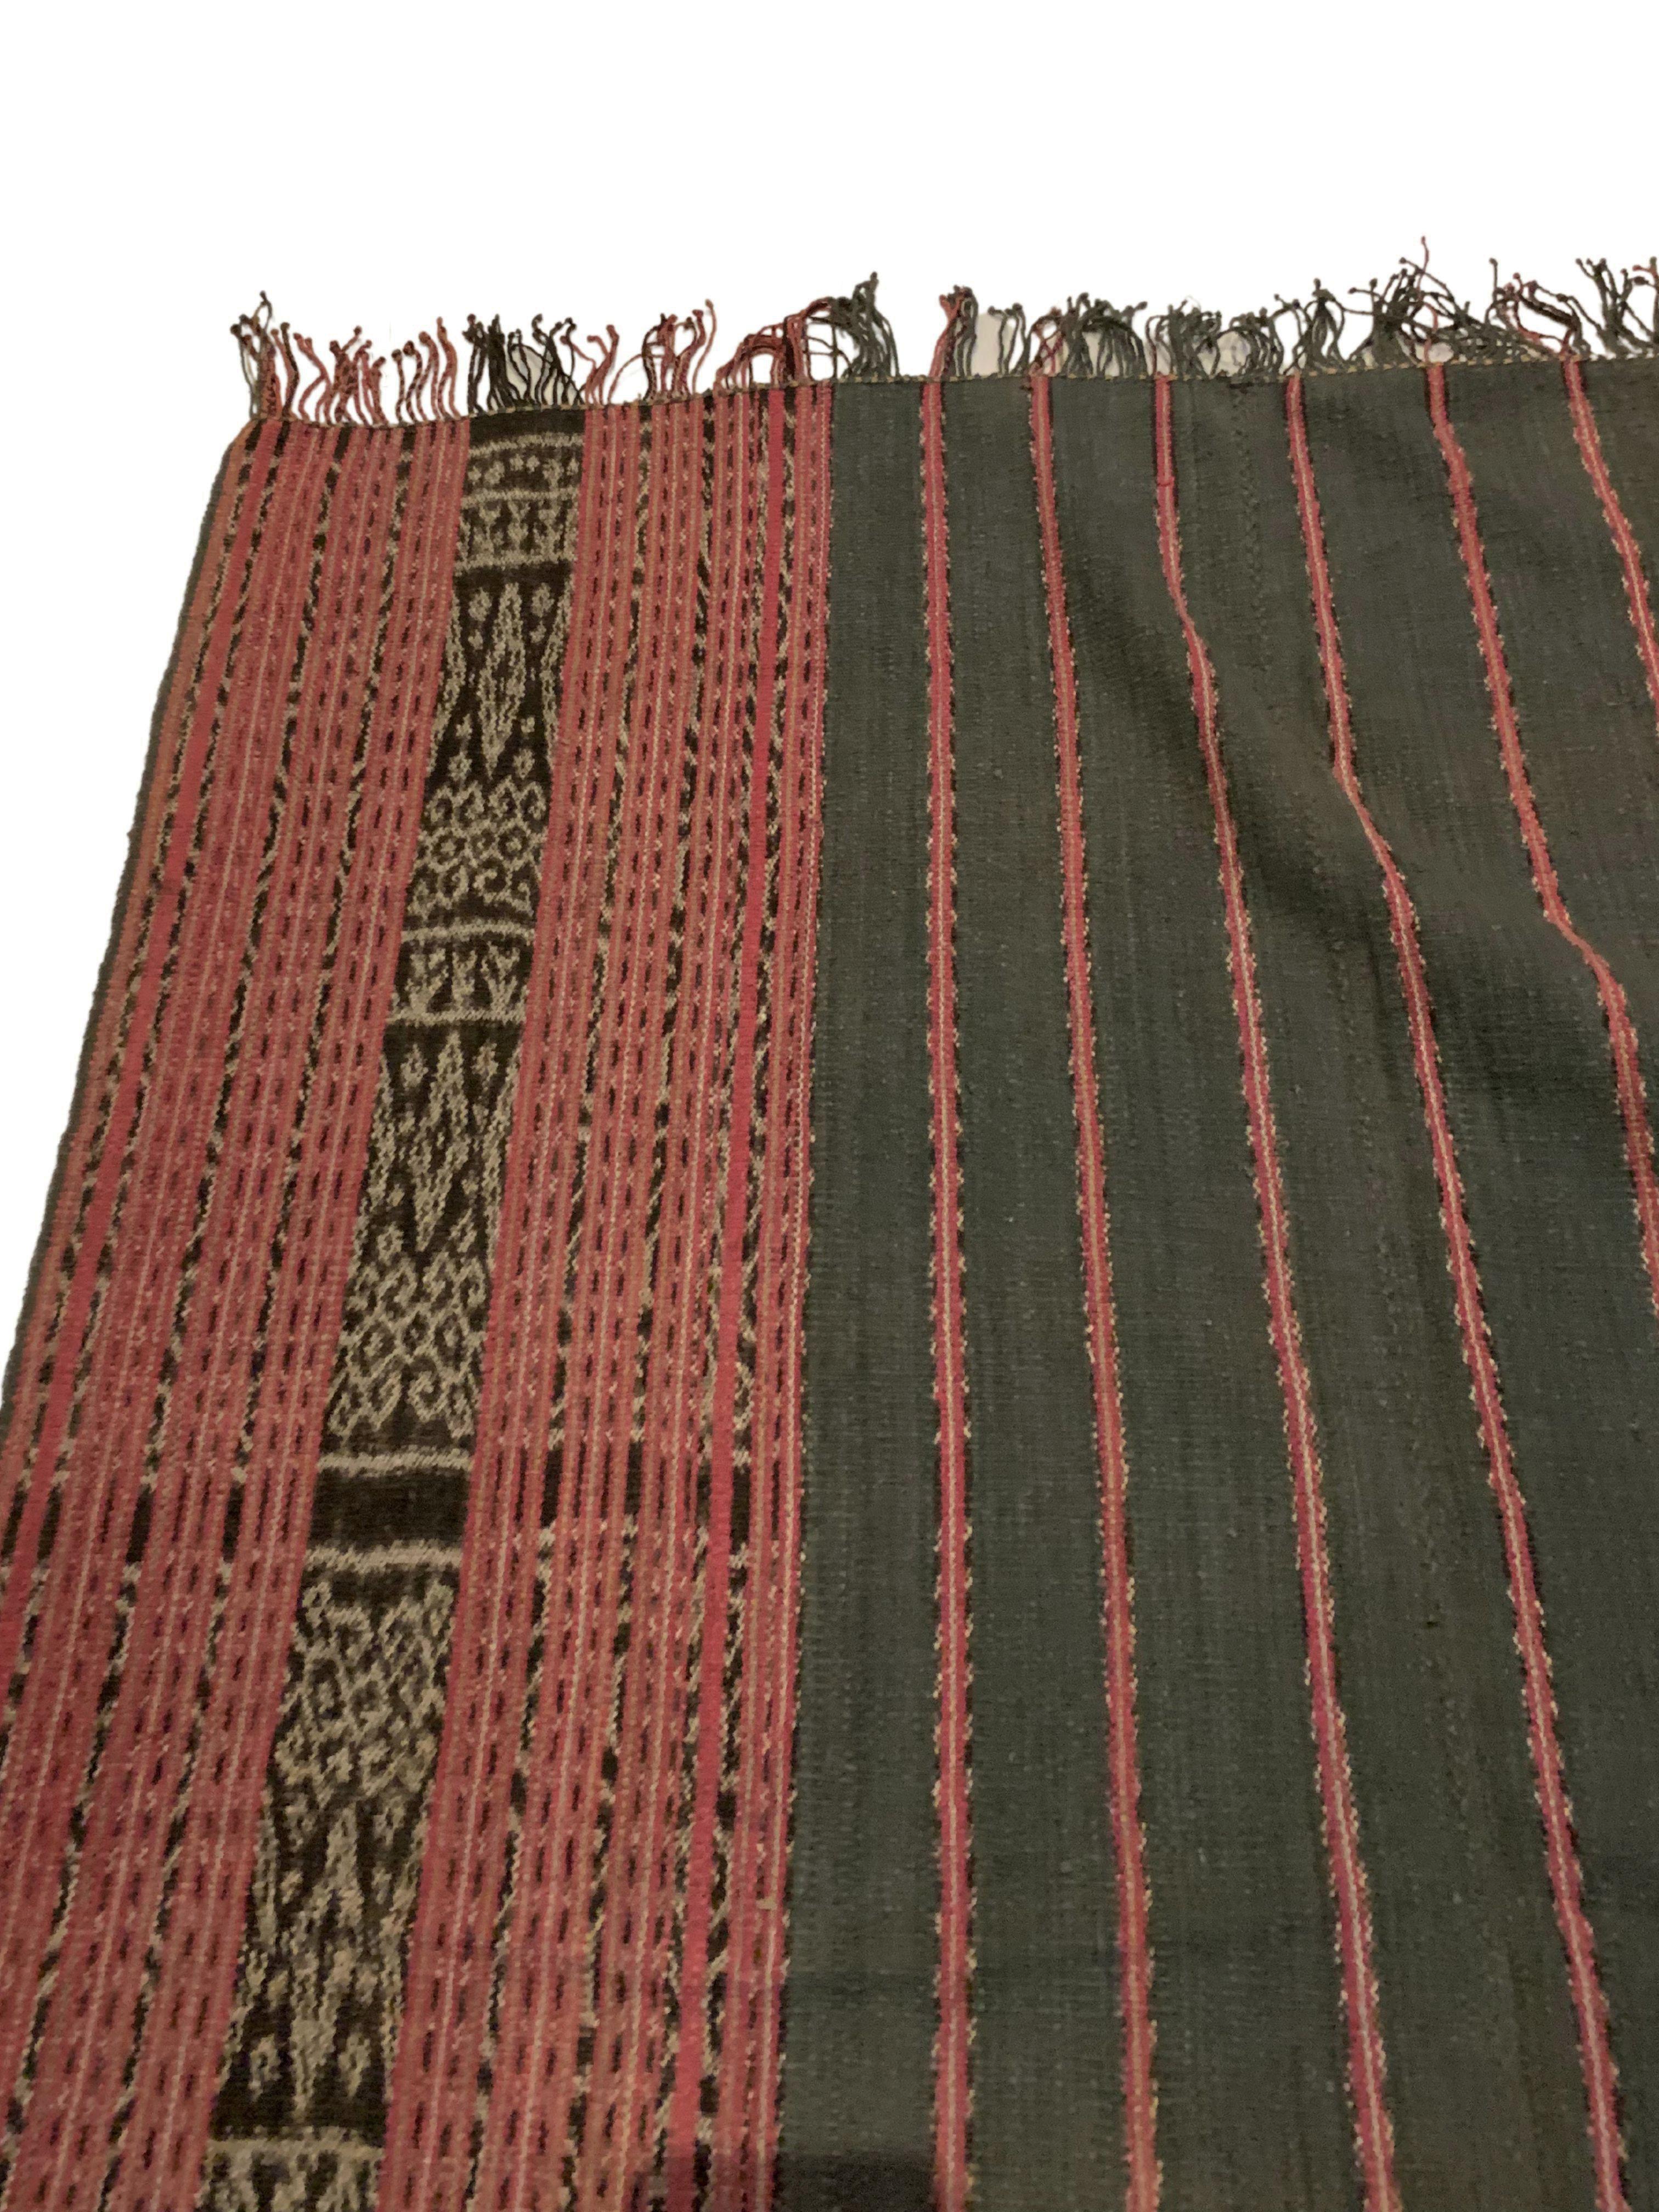 Indonesian Ikat Textile from Timor Stunning Tribal Motifs & Colors, Indonesia, c. 1950